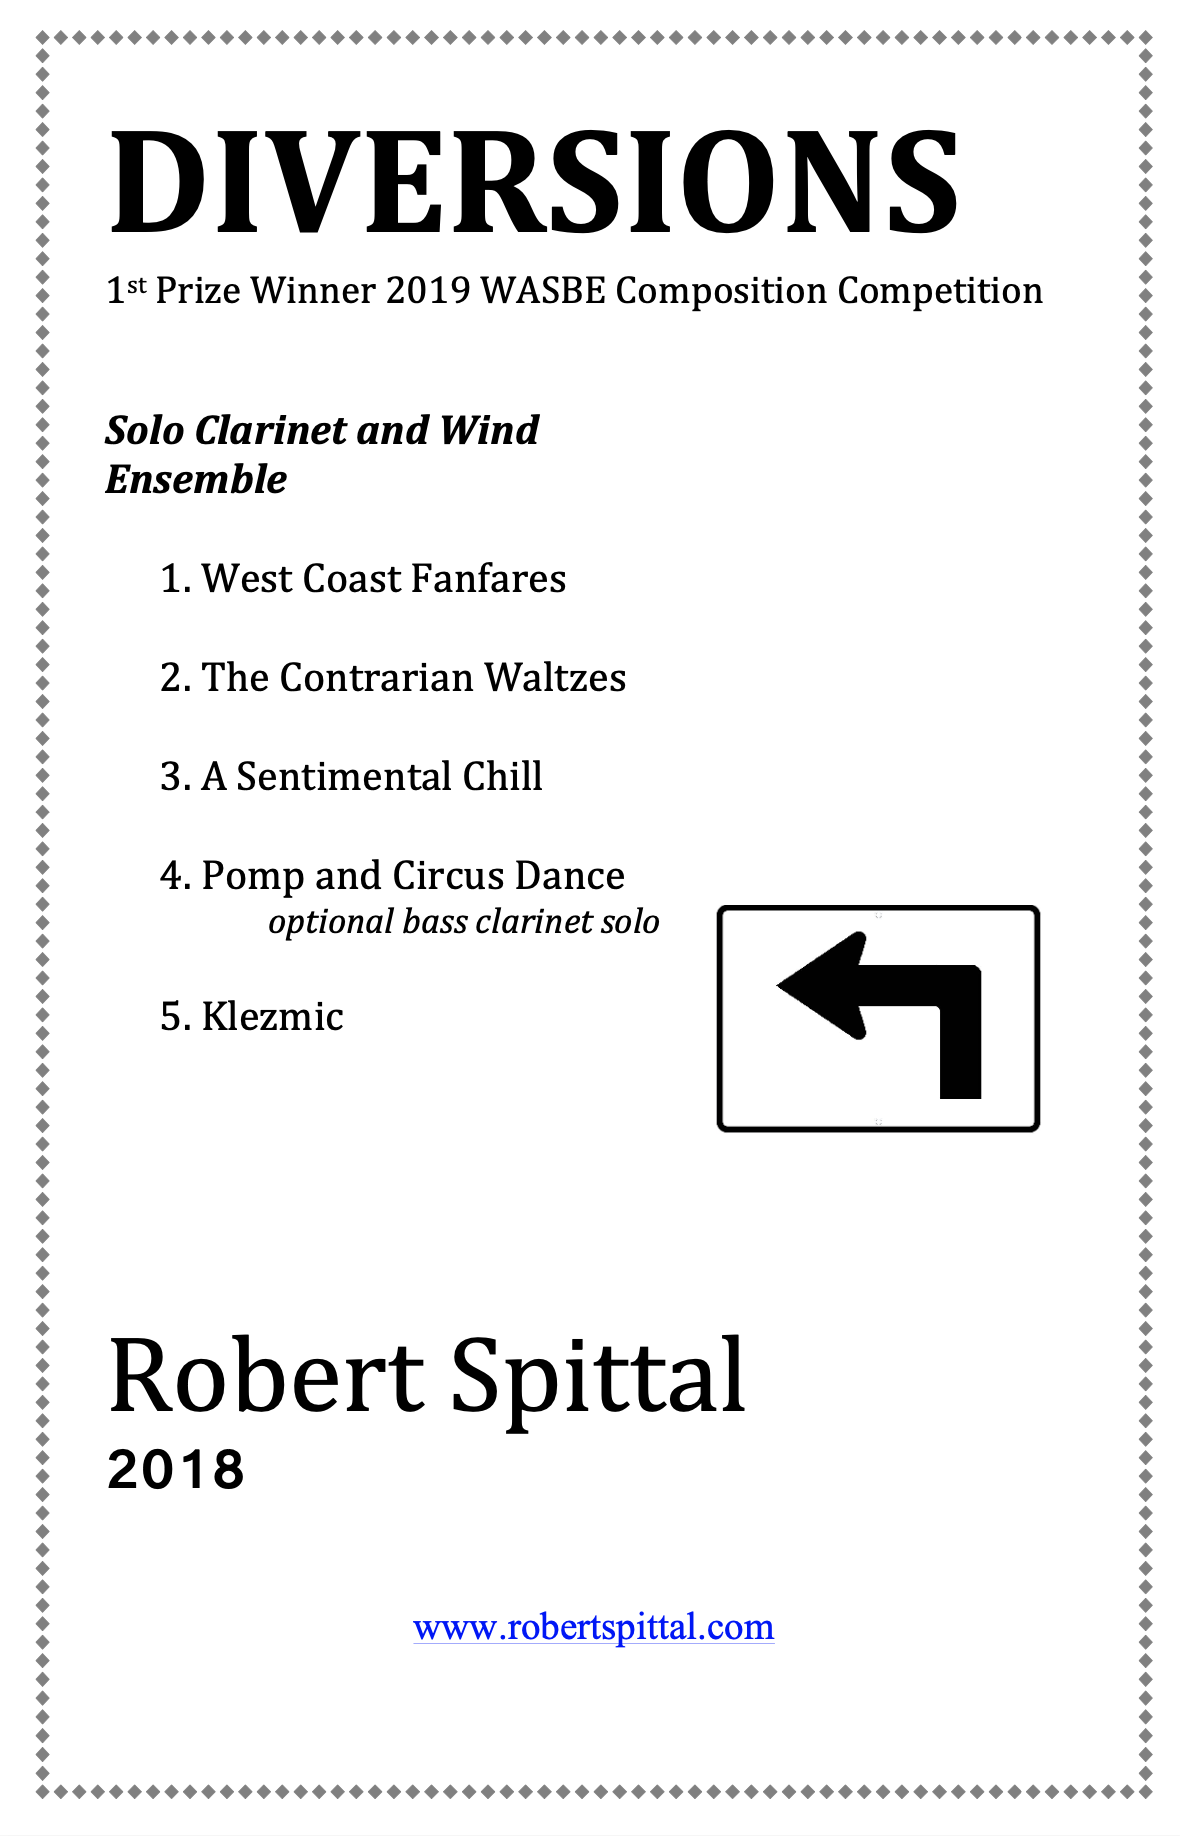 Diversions For Clarinet And Wind Ensemble by Robert Spittal